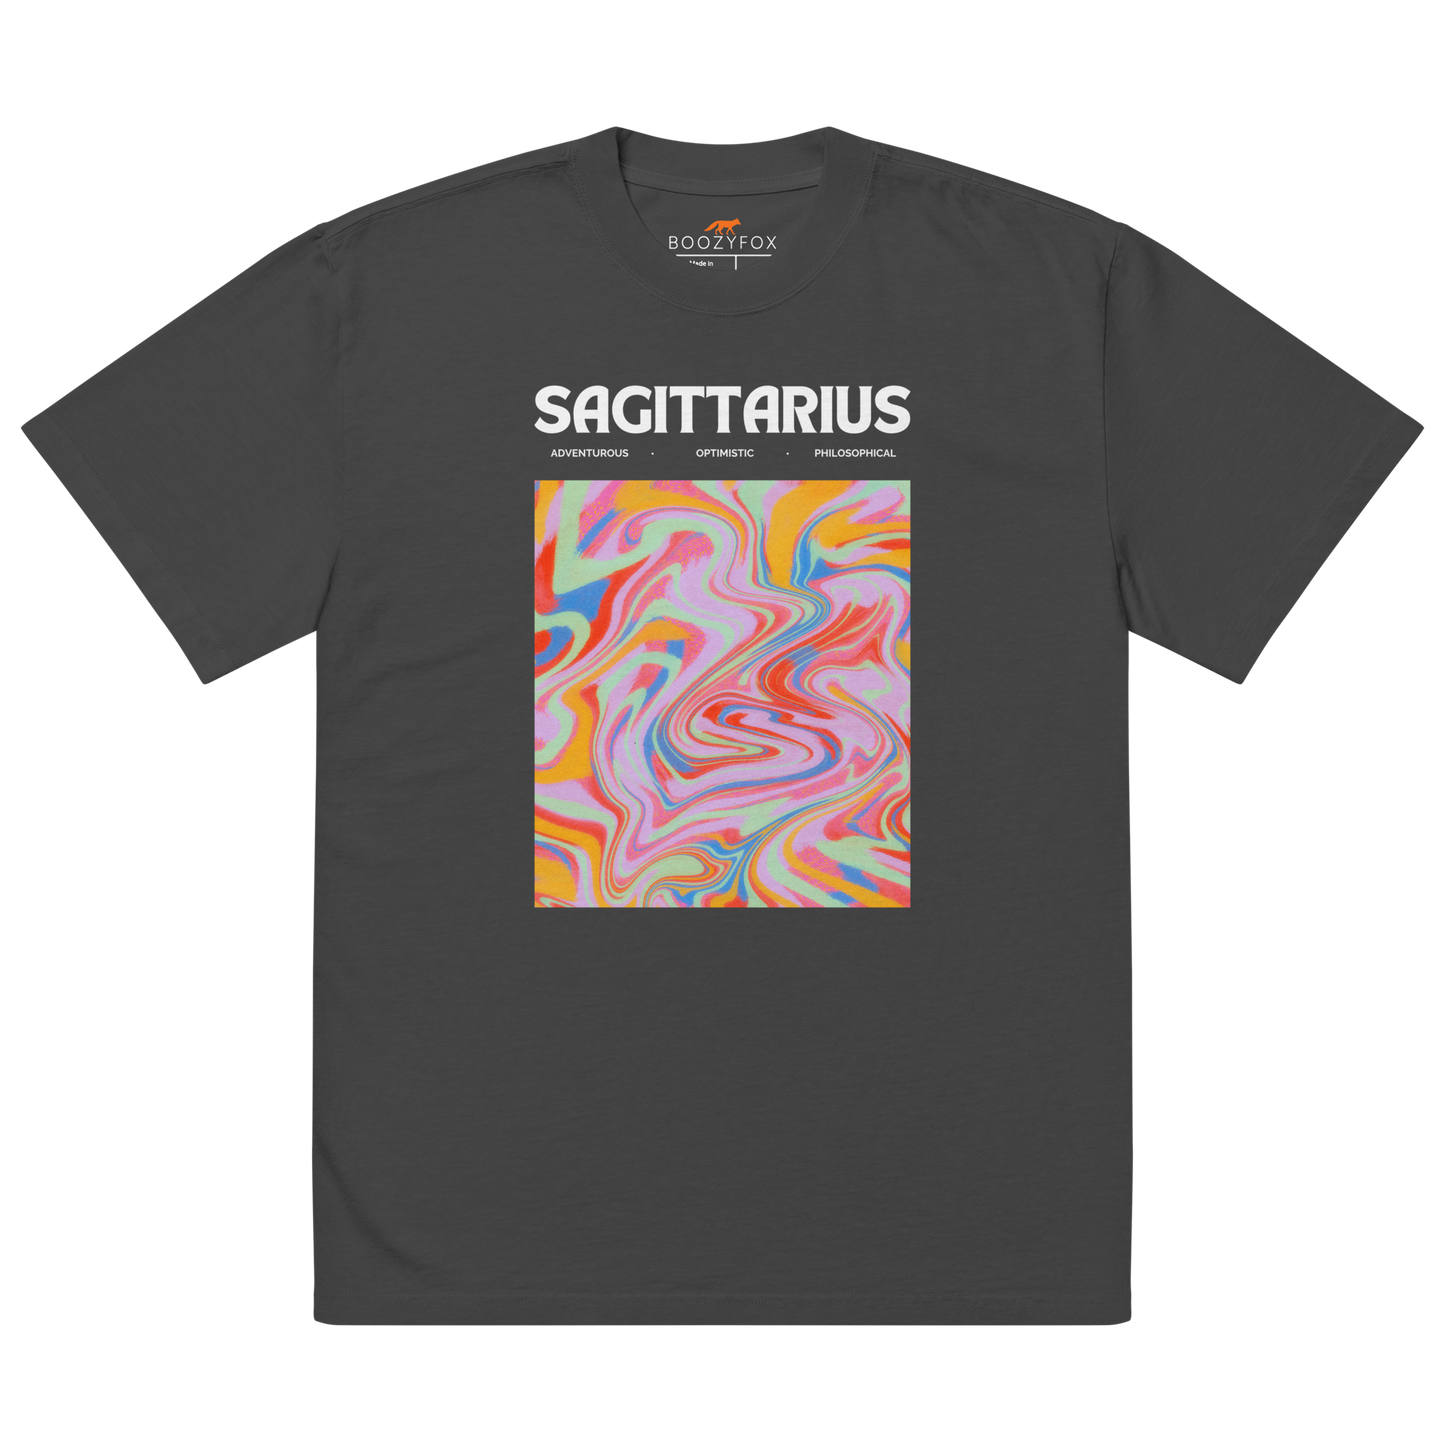 Faded Black Sagittarius Oversized T-Shirt featuring an Abstract Sagittarius Star Sign graphic on the chest - Cool Graphic Zodiac Oversized Tees - Boozy Fox